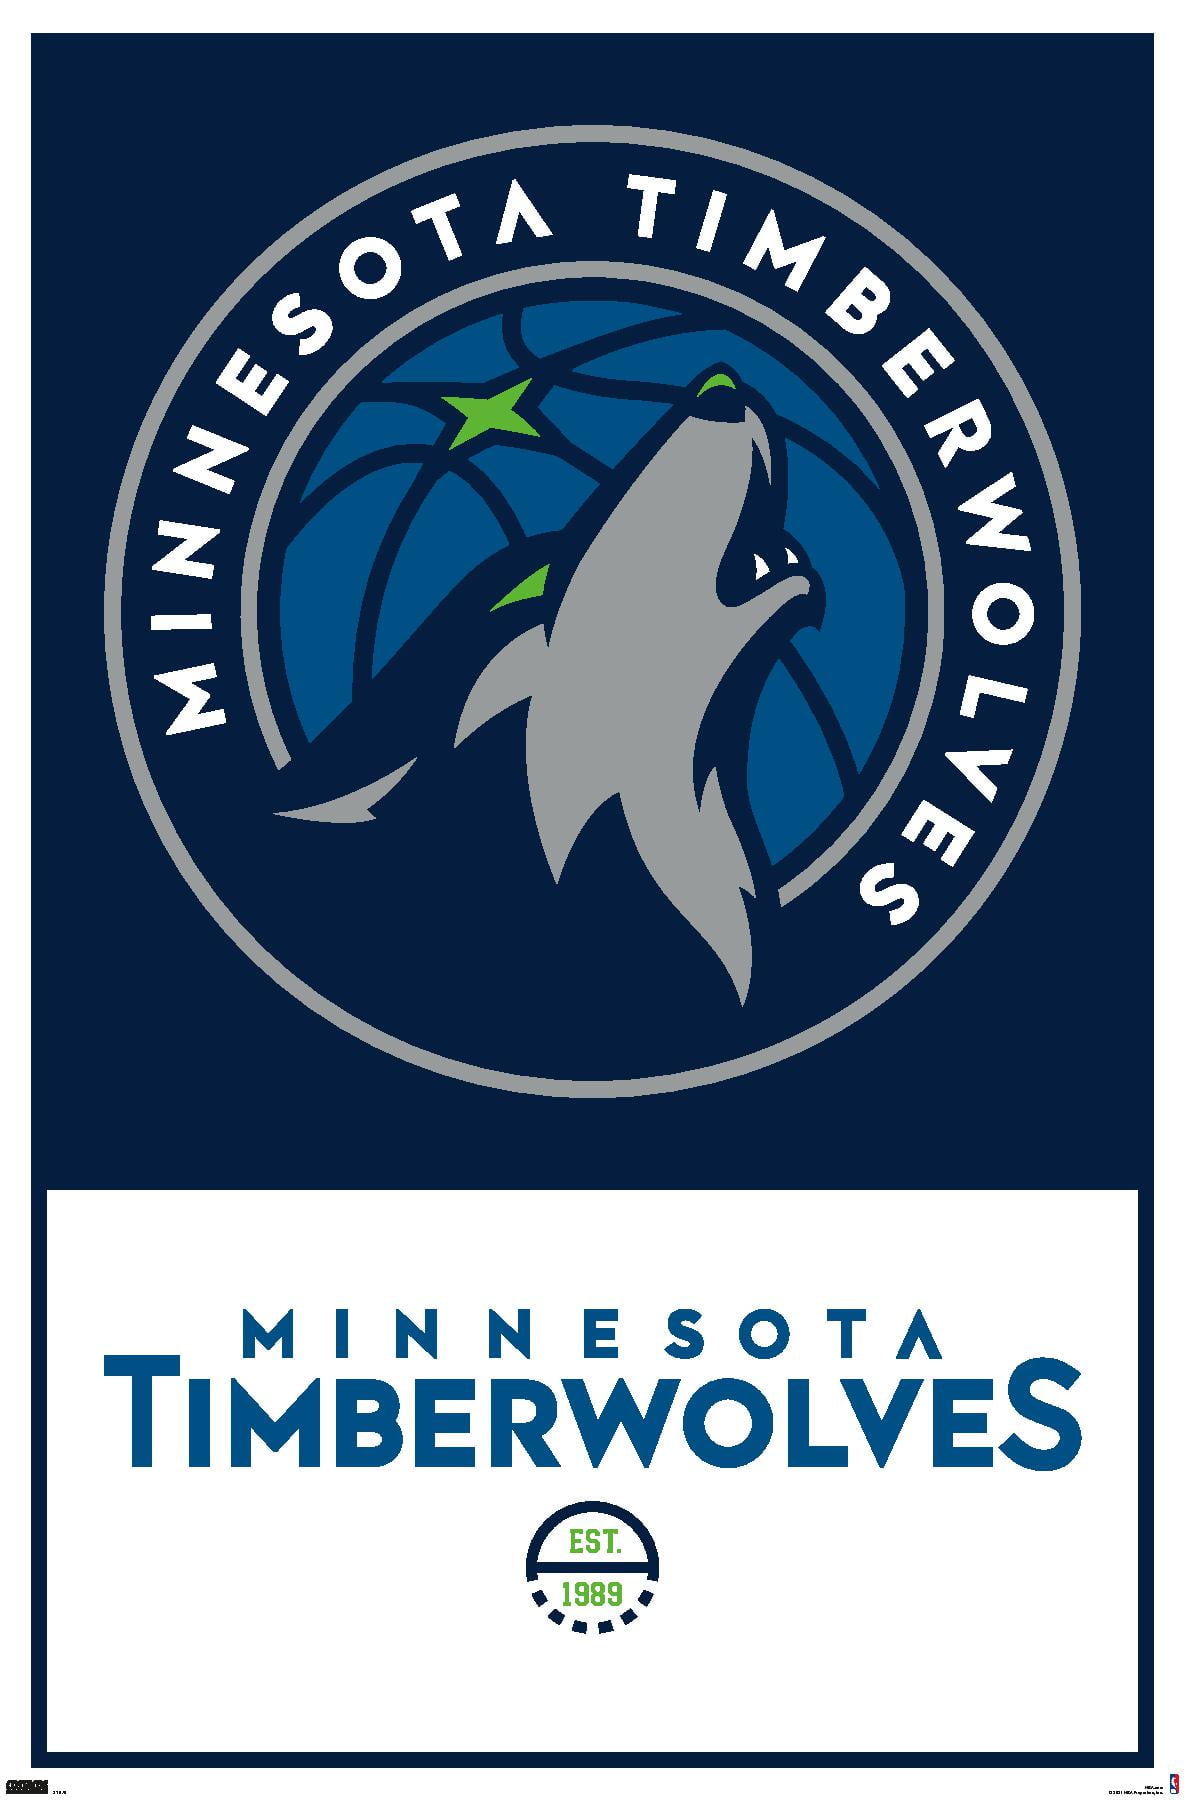 Minnesota Timberwolves New Styles from Top Brands, Timberwolves